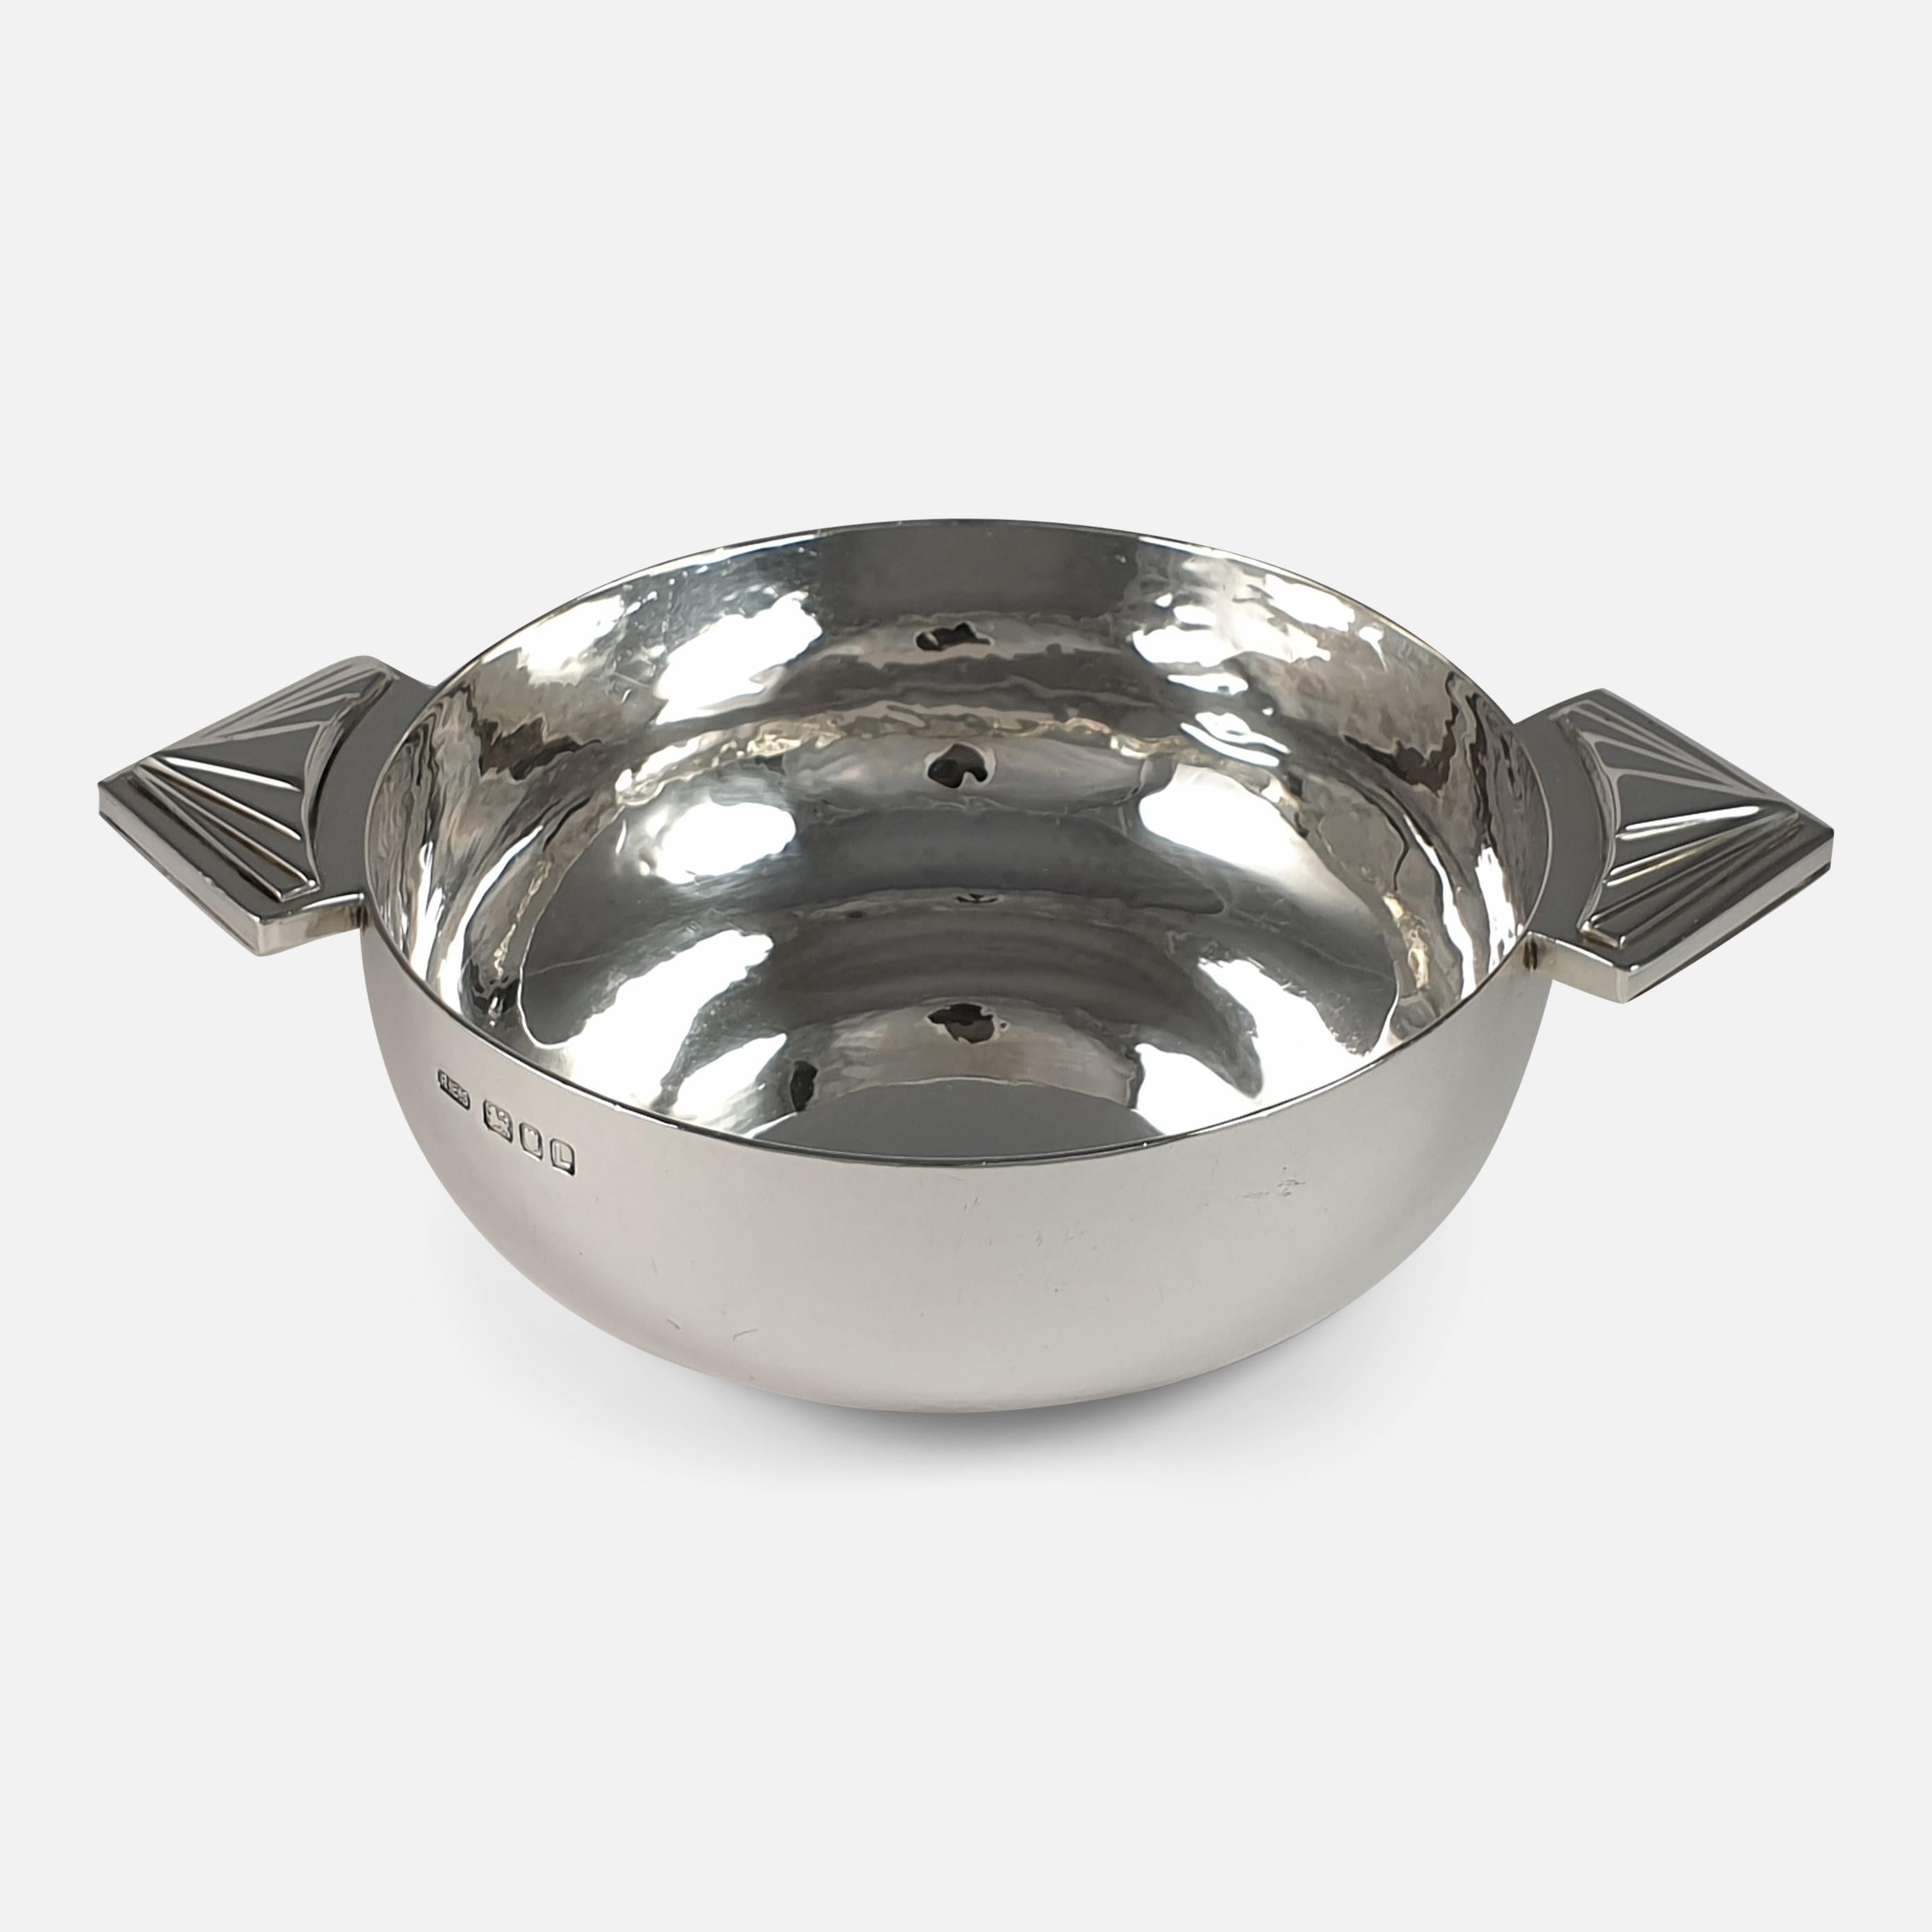 A George VI sterling silver Quaich in the Art Deco style; hallmarked London, 1946, and made by highly collectable silversmith R.E. Stone. The Quaich is of circular spot-hammered form, with triangular geometric design applied to the